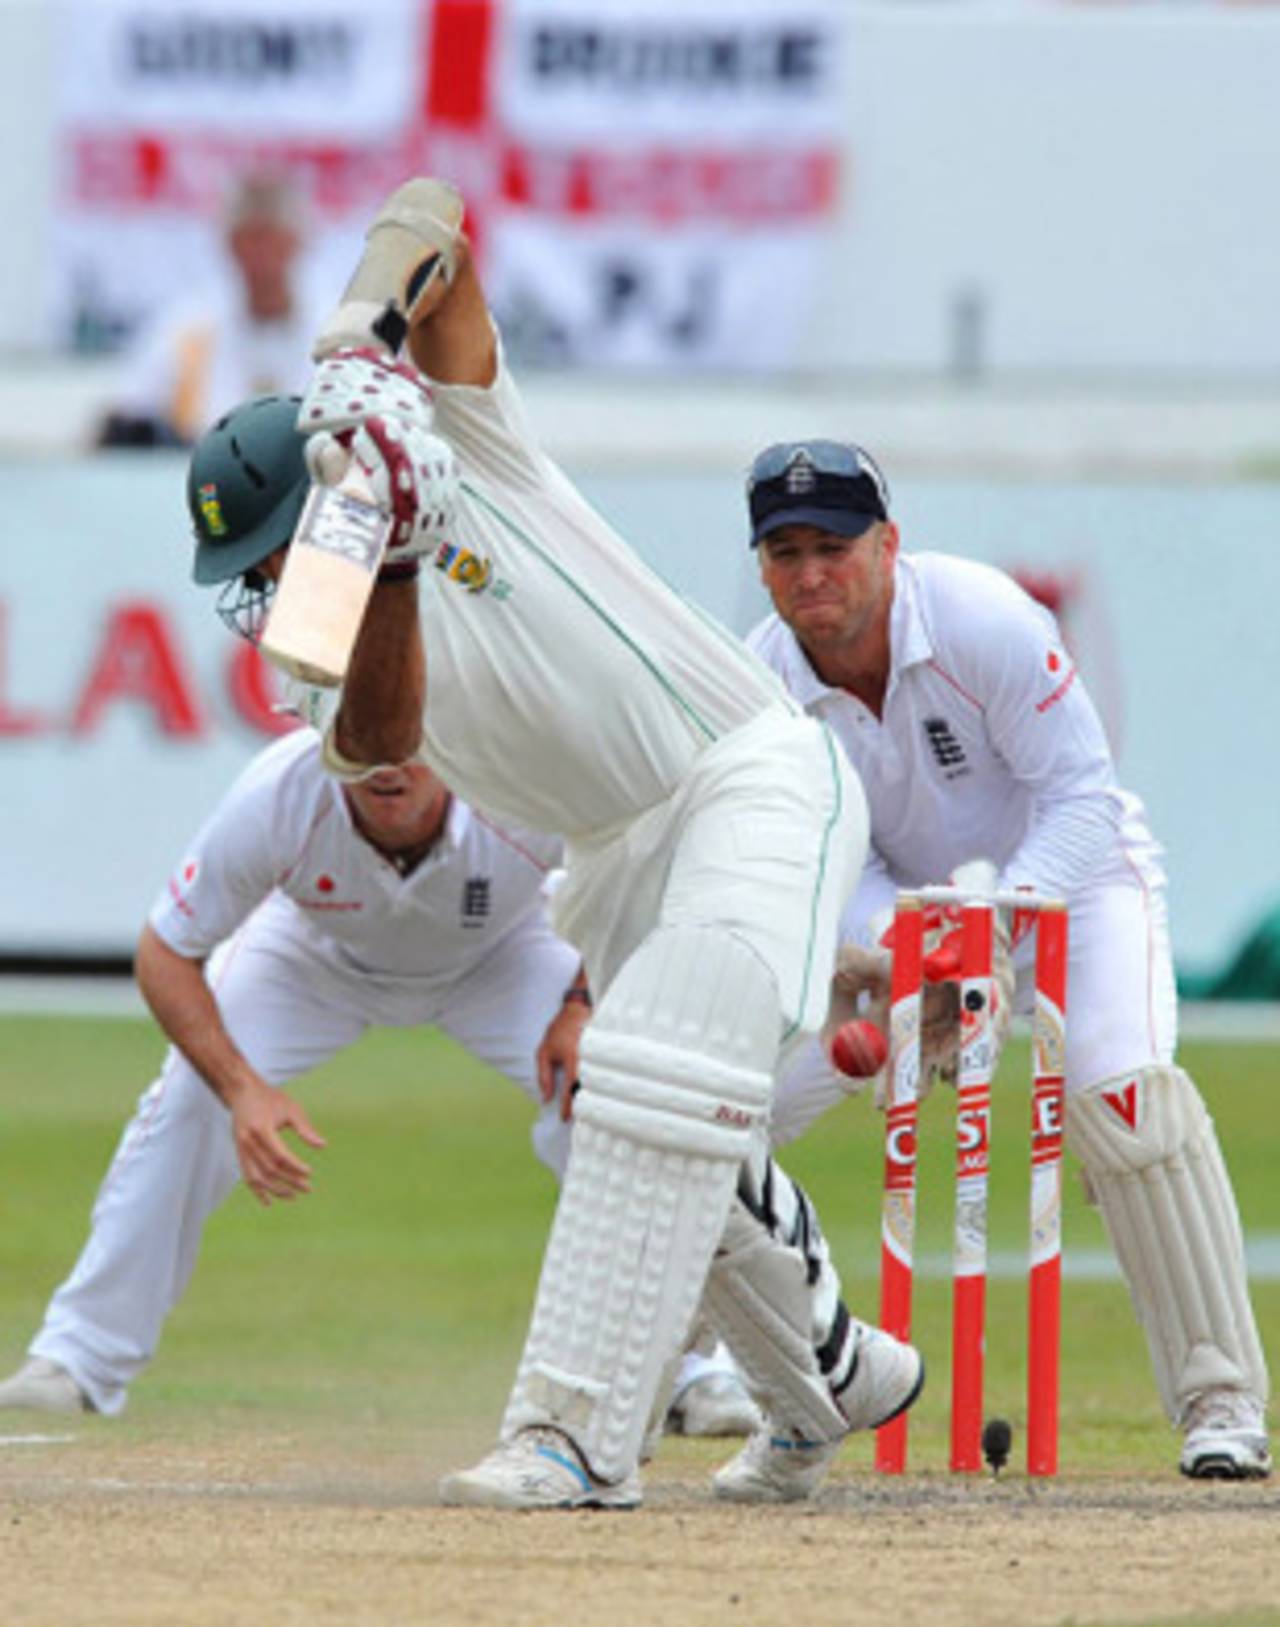 Graeme Swann spun one back through the gate of Hashim Amla to claim his second wicket, South Africa v England, 2nd Test, Durban, December 29, 2009 